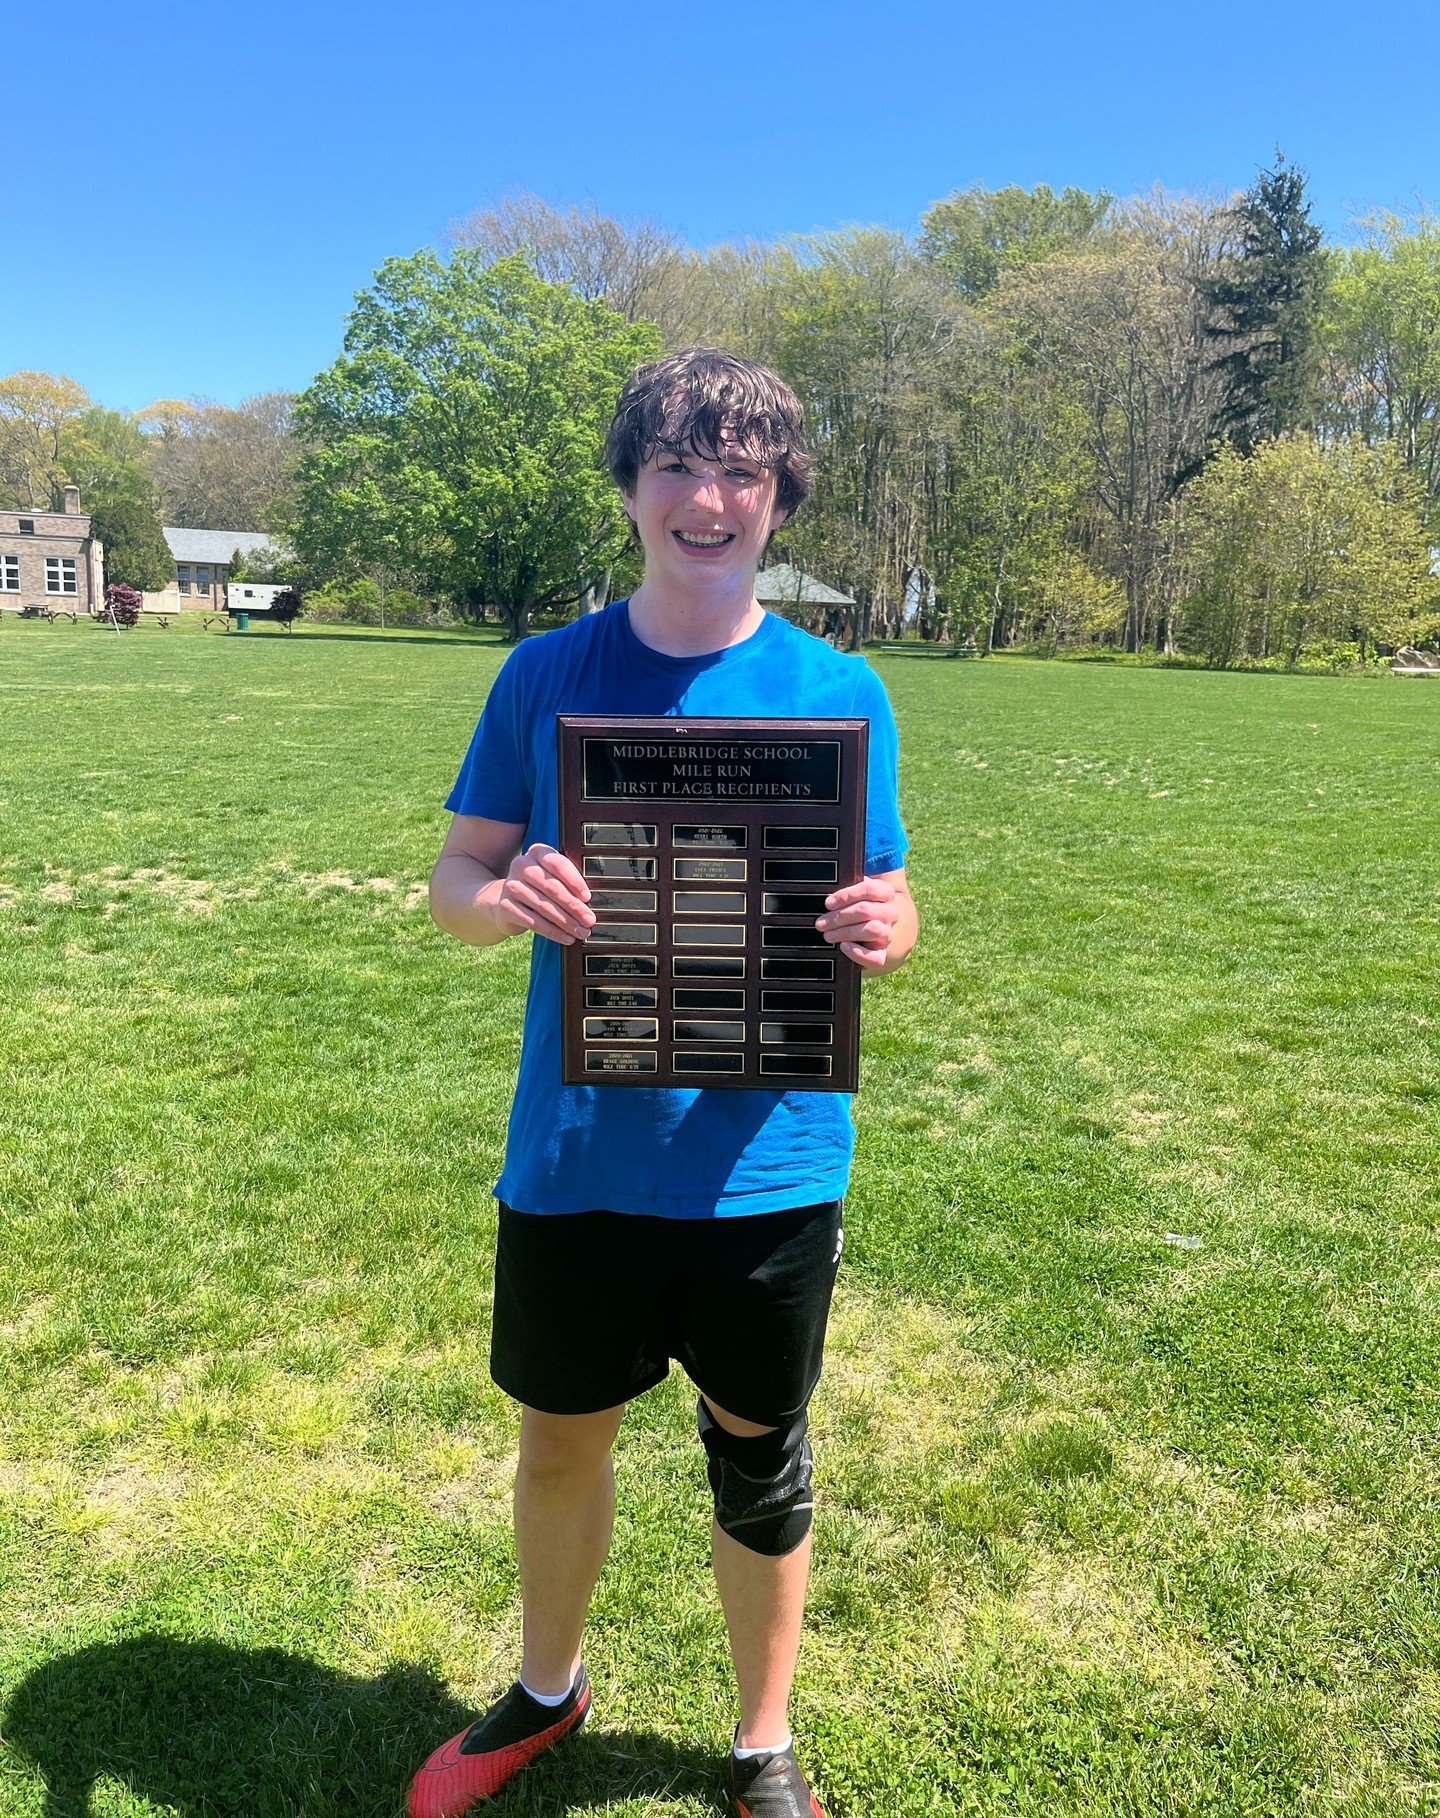 Spring weather means it&rsquo;s time for the Annual Community Mile Run! 🏃 MBS students worked hard for their best run times, while the rest of the community turned out to cheer the runners on. Congratulations to Griffin for the fastest time this spr